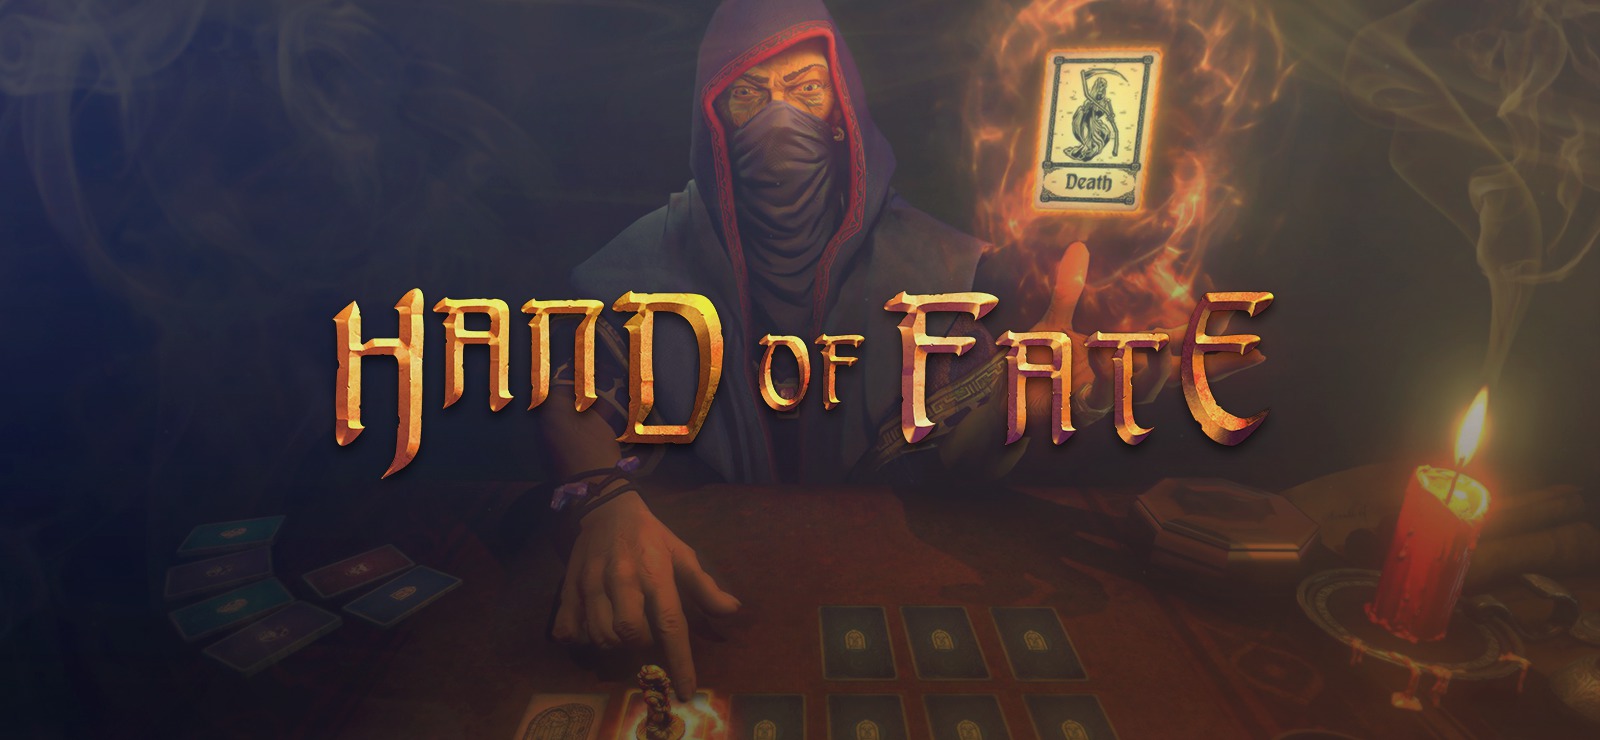 hand of fate game torrent